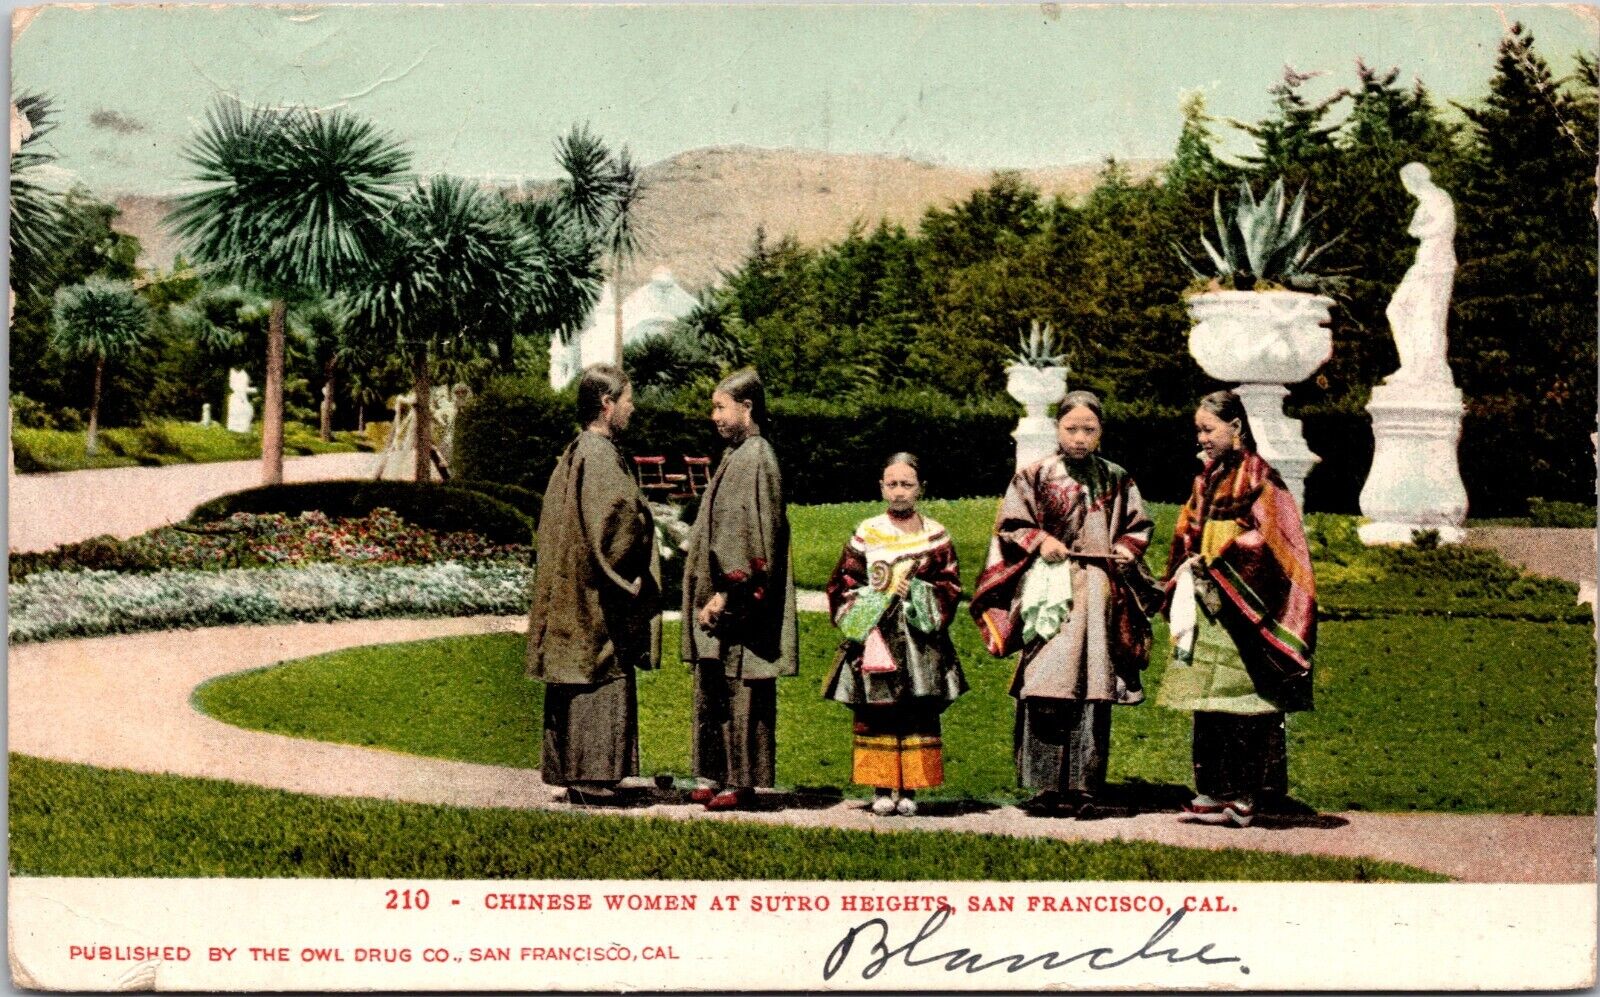 C1910 SAN FRANCISCO, CA CHINESE WOMEN at SUTRO HEIGHTS Postcard A1